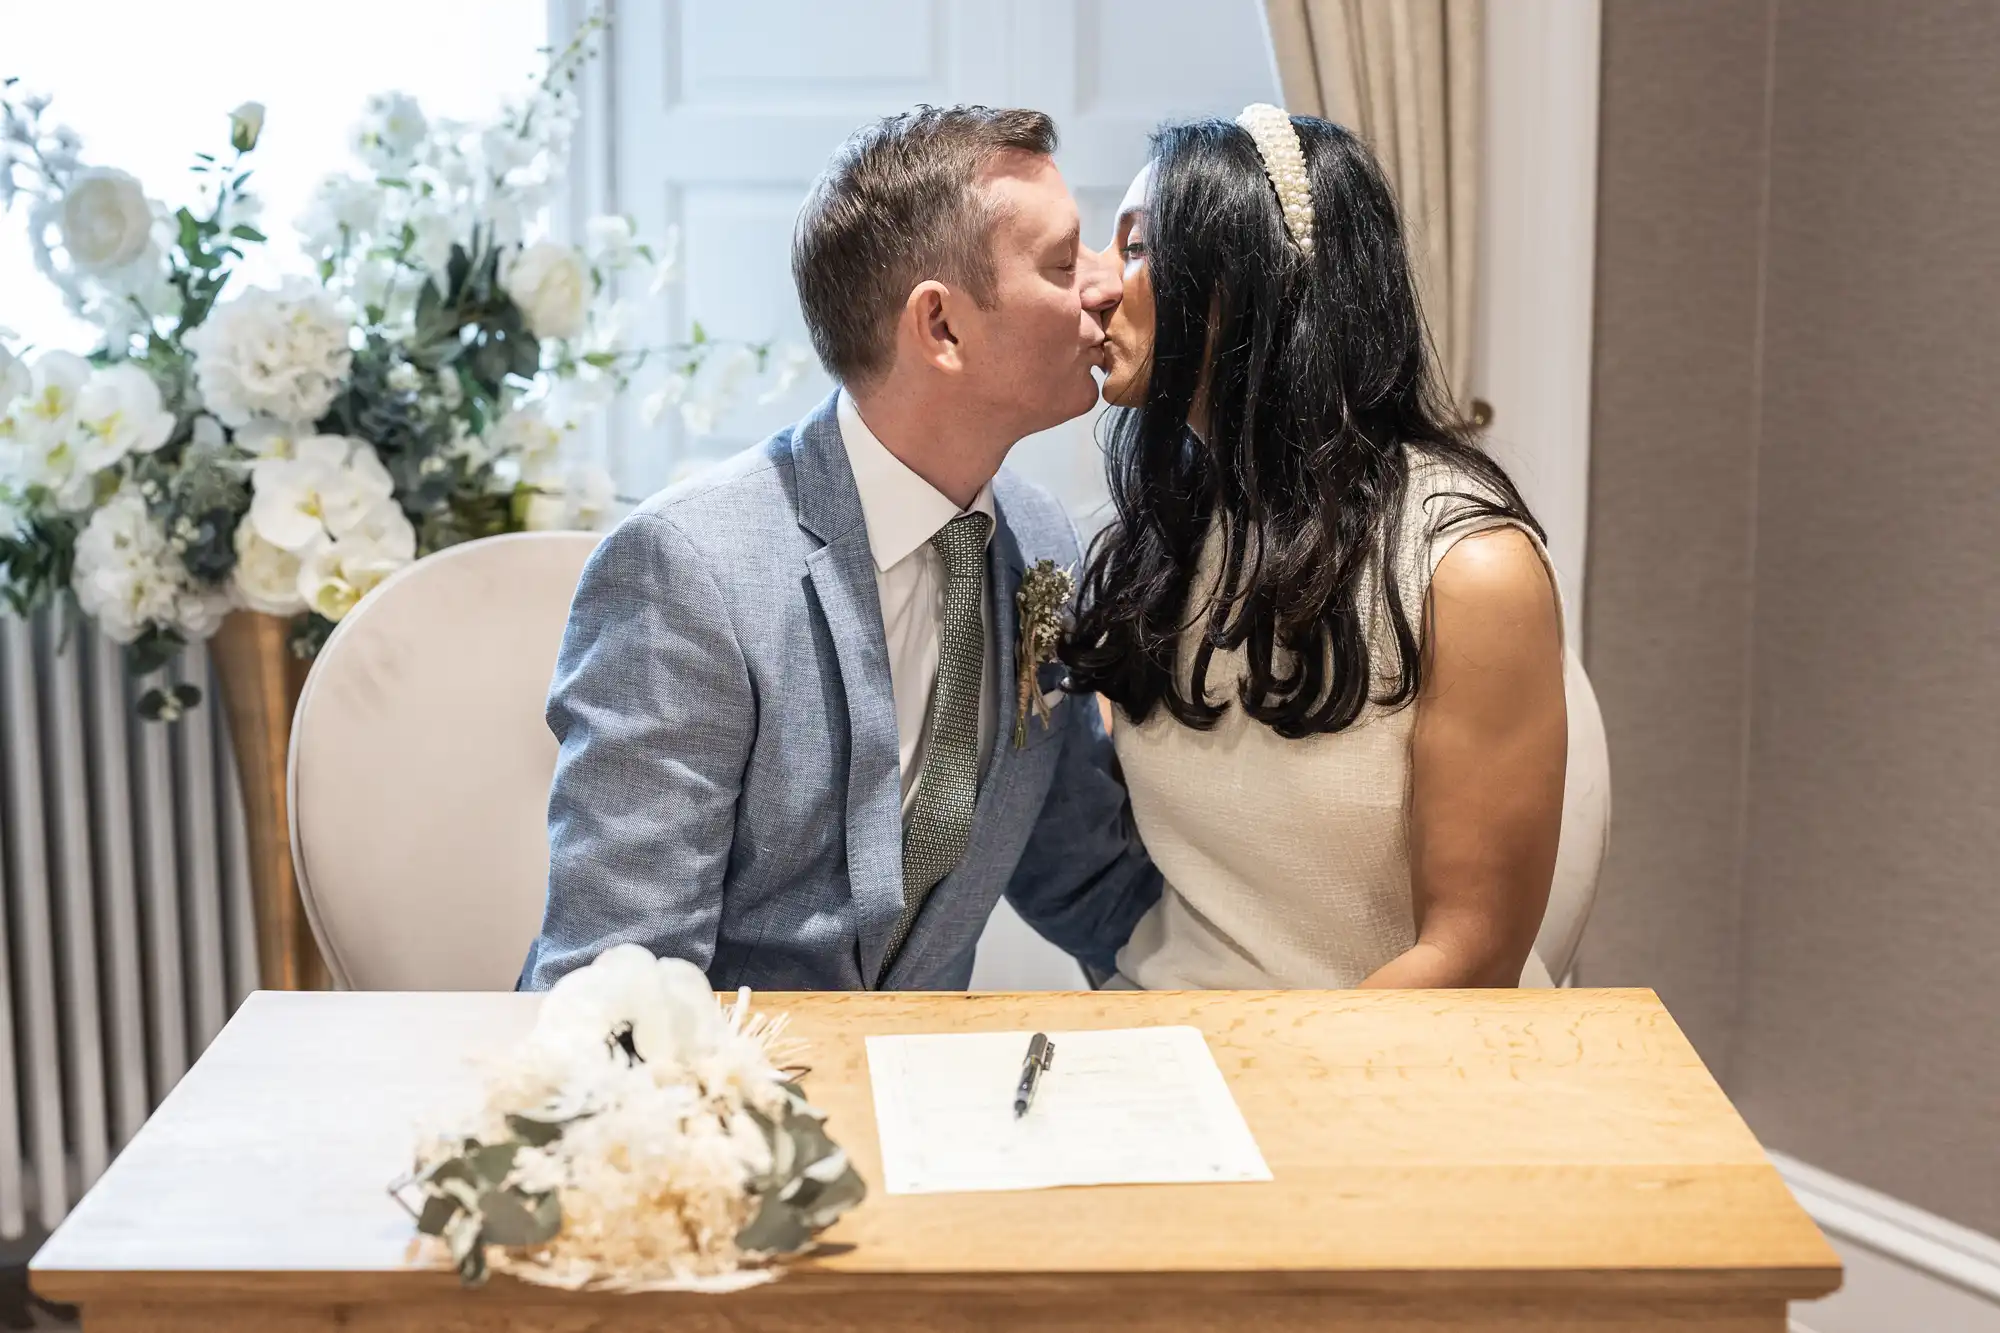 A couple kisses while seated at a wooden table with a document and pen. A bouquet of flowers is on the table. A floral arrangement is visible in the background.